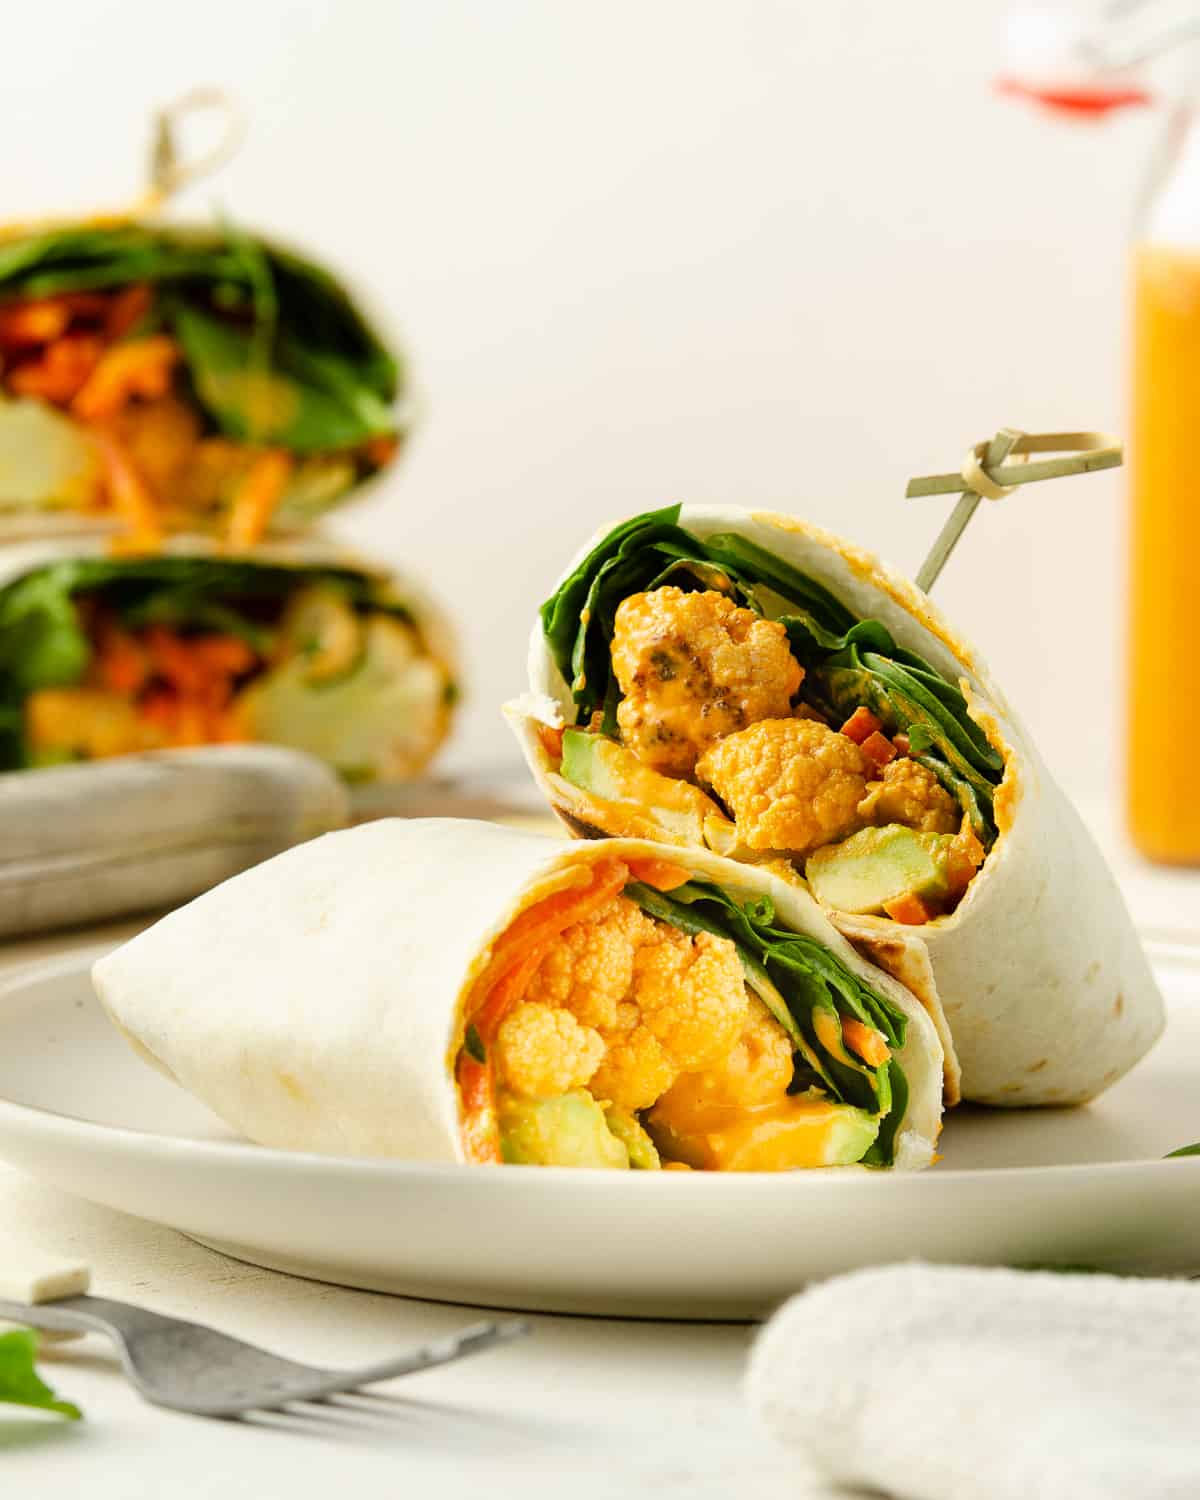 An angled view of two vegan wraps cut in half on top of a plate.